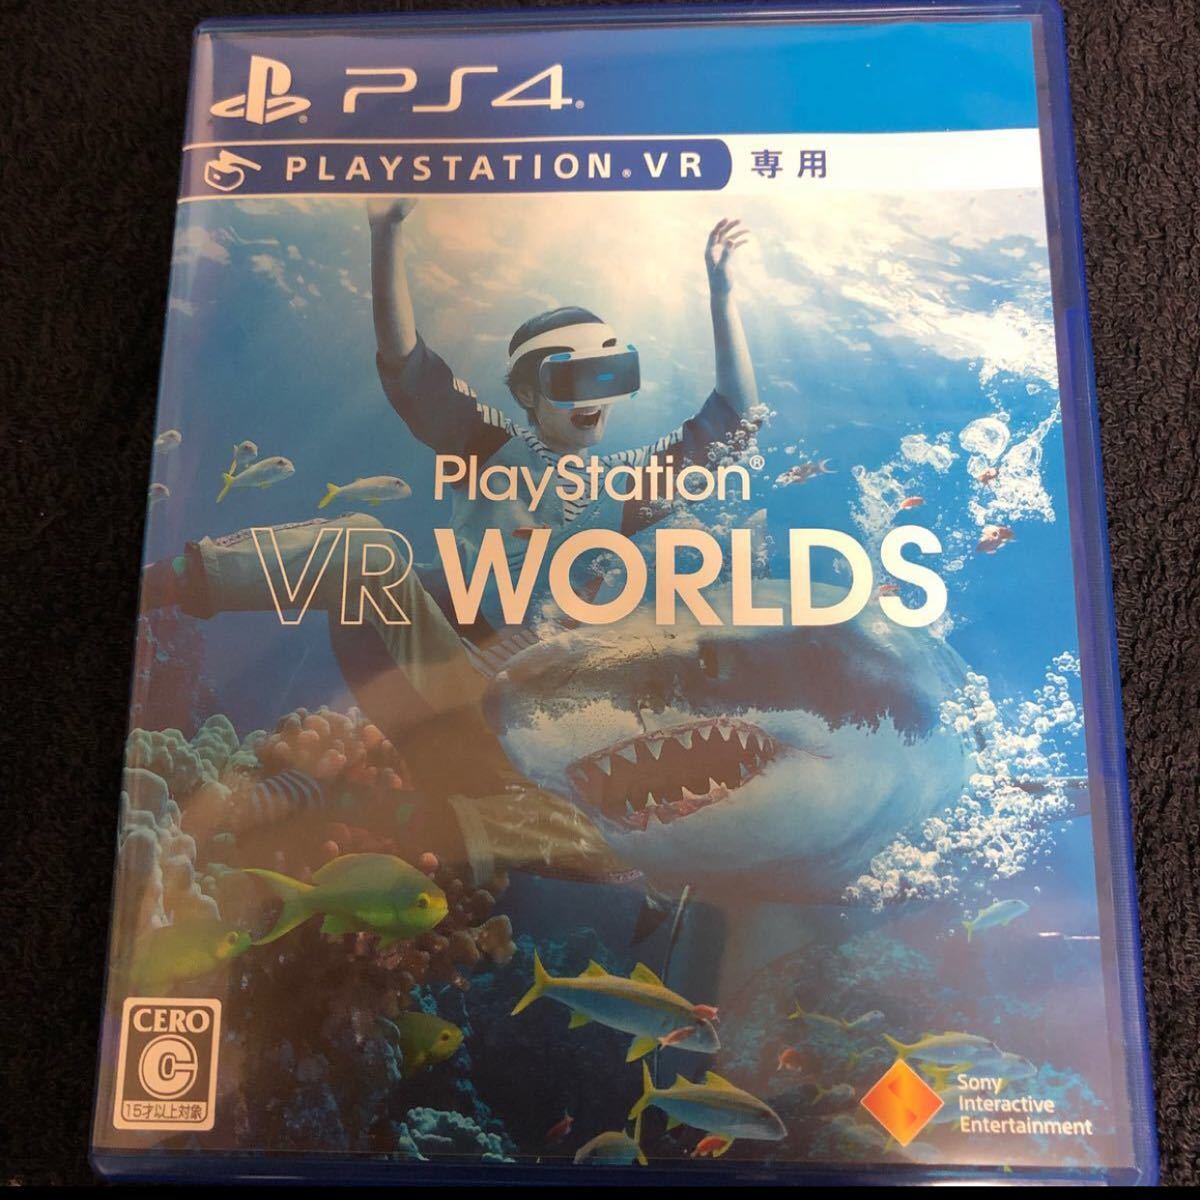 【PS4】 ARK Park [DELUXE EDITION] 、PlayStation VR WORLDS  ワールド　セット　